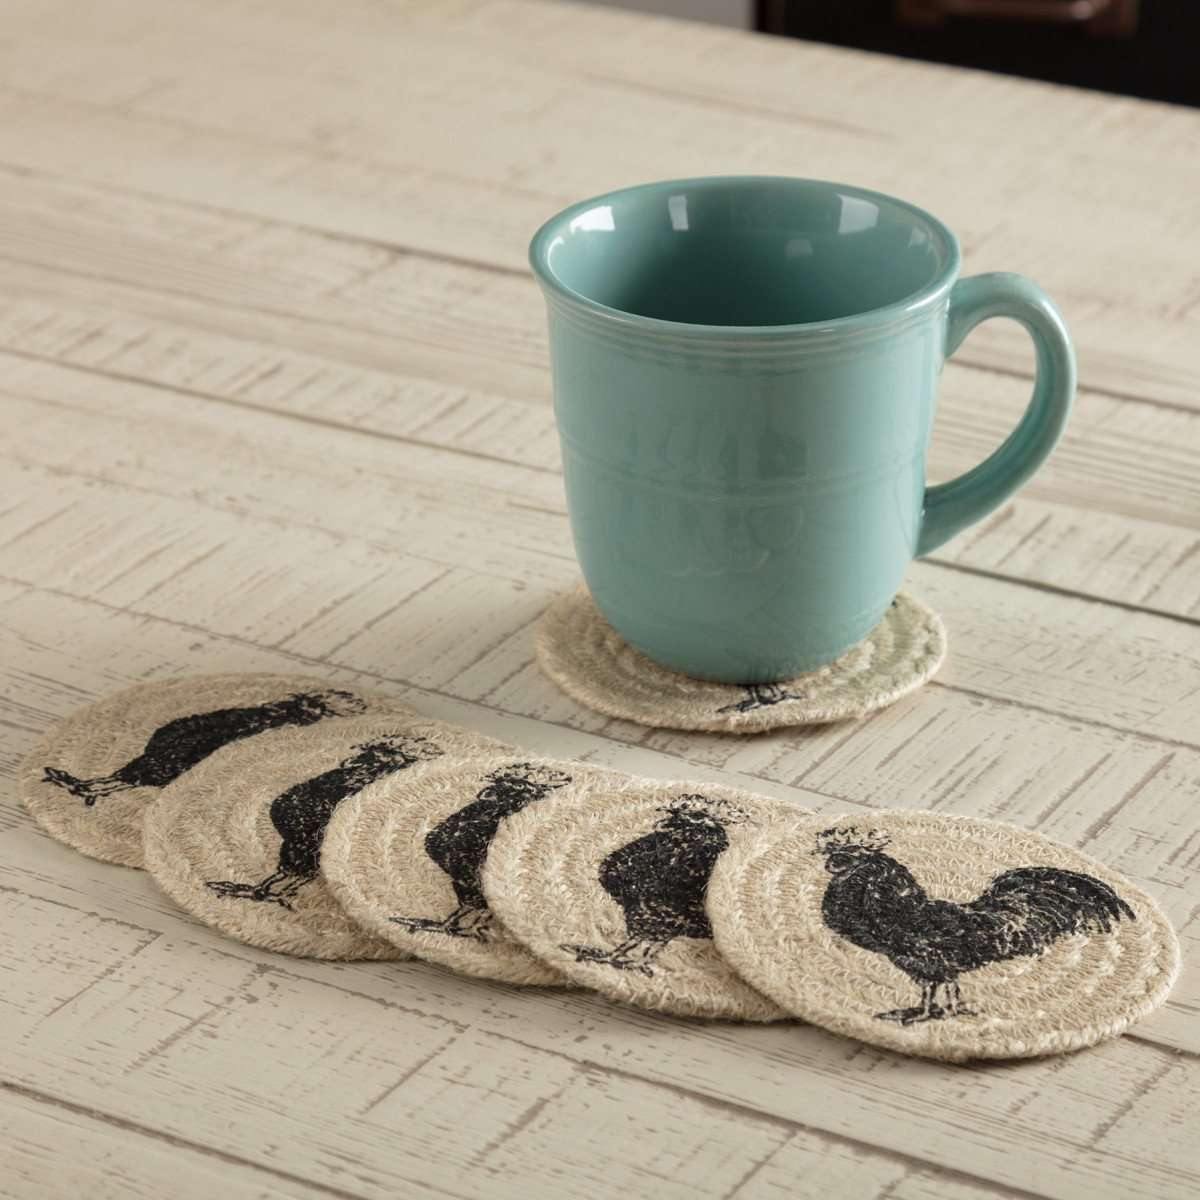 Sawyer Mill Charcoal Poultry Jute Coaster Set of 6 VHC Brands